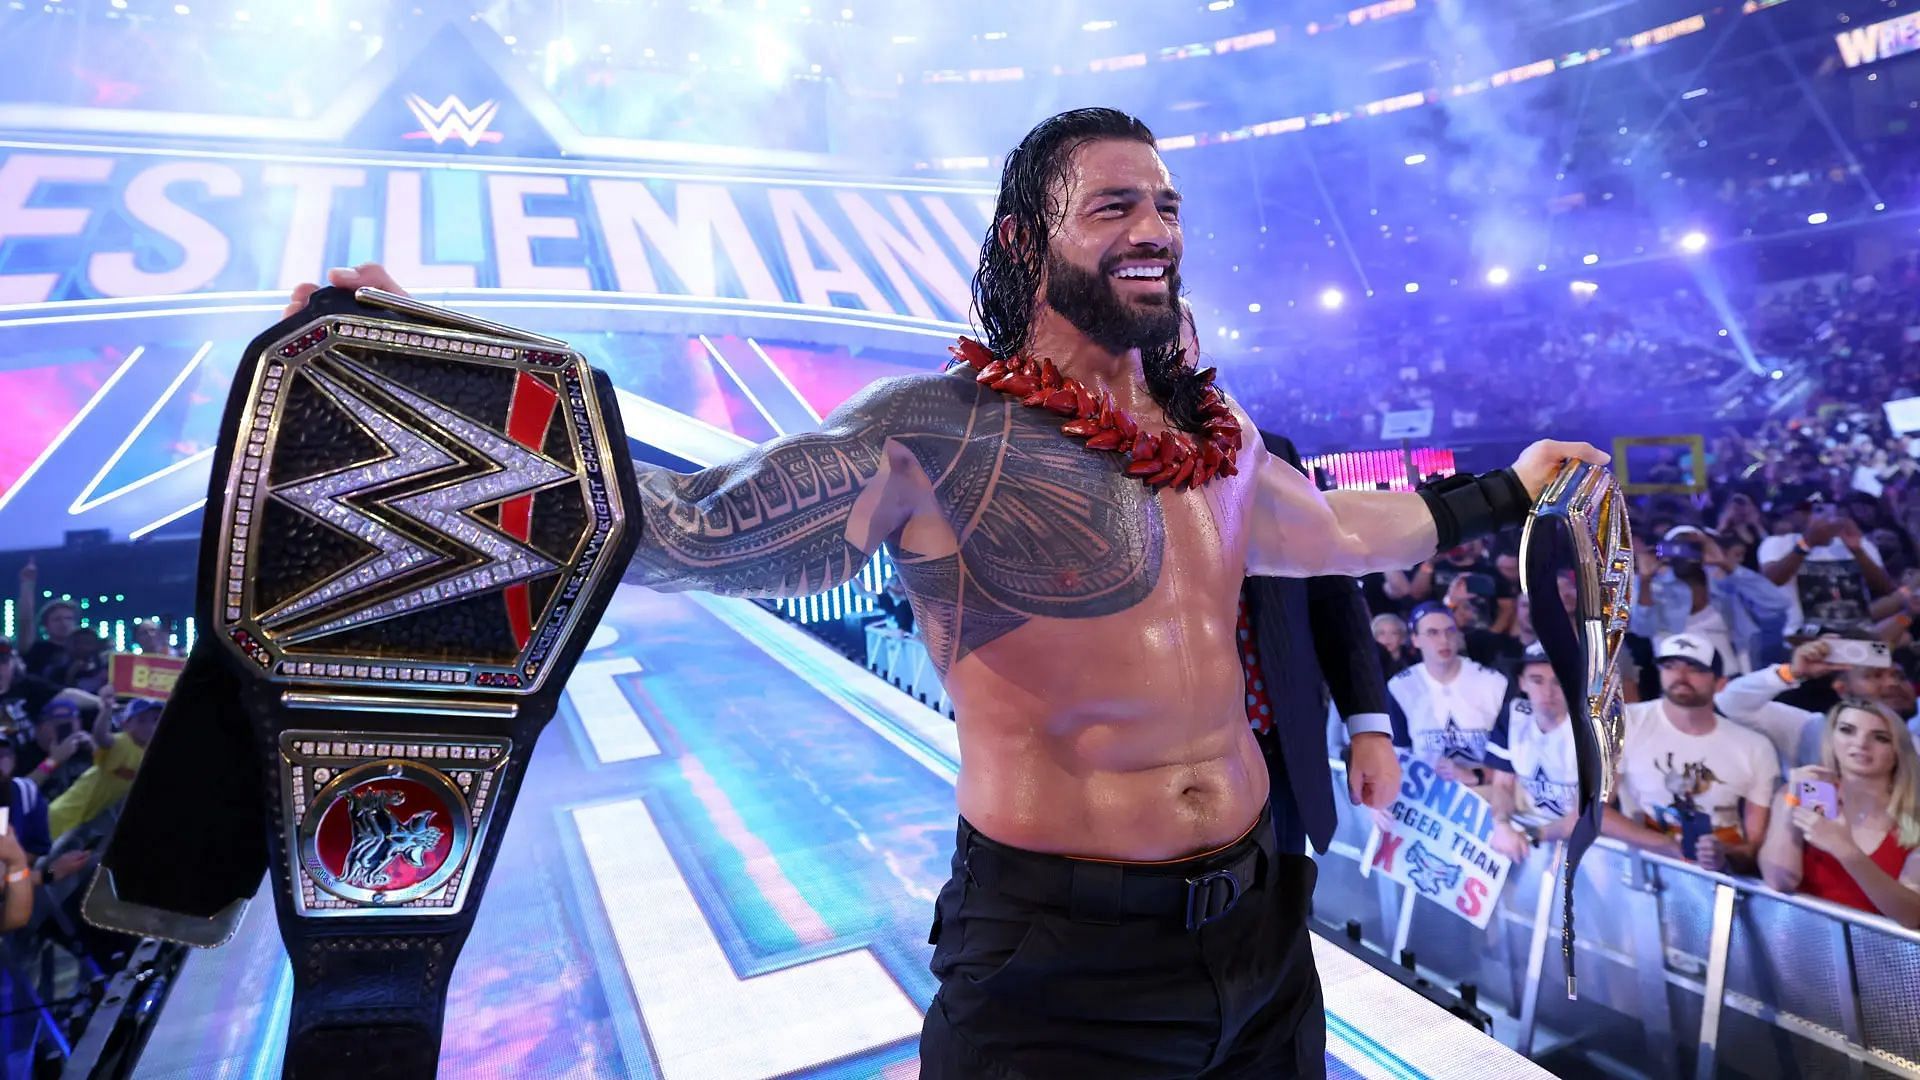 Roman Reigns is the reigning Undisputed WWE Universal Champion.